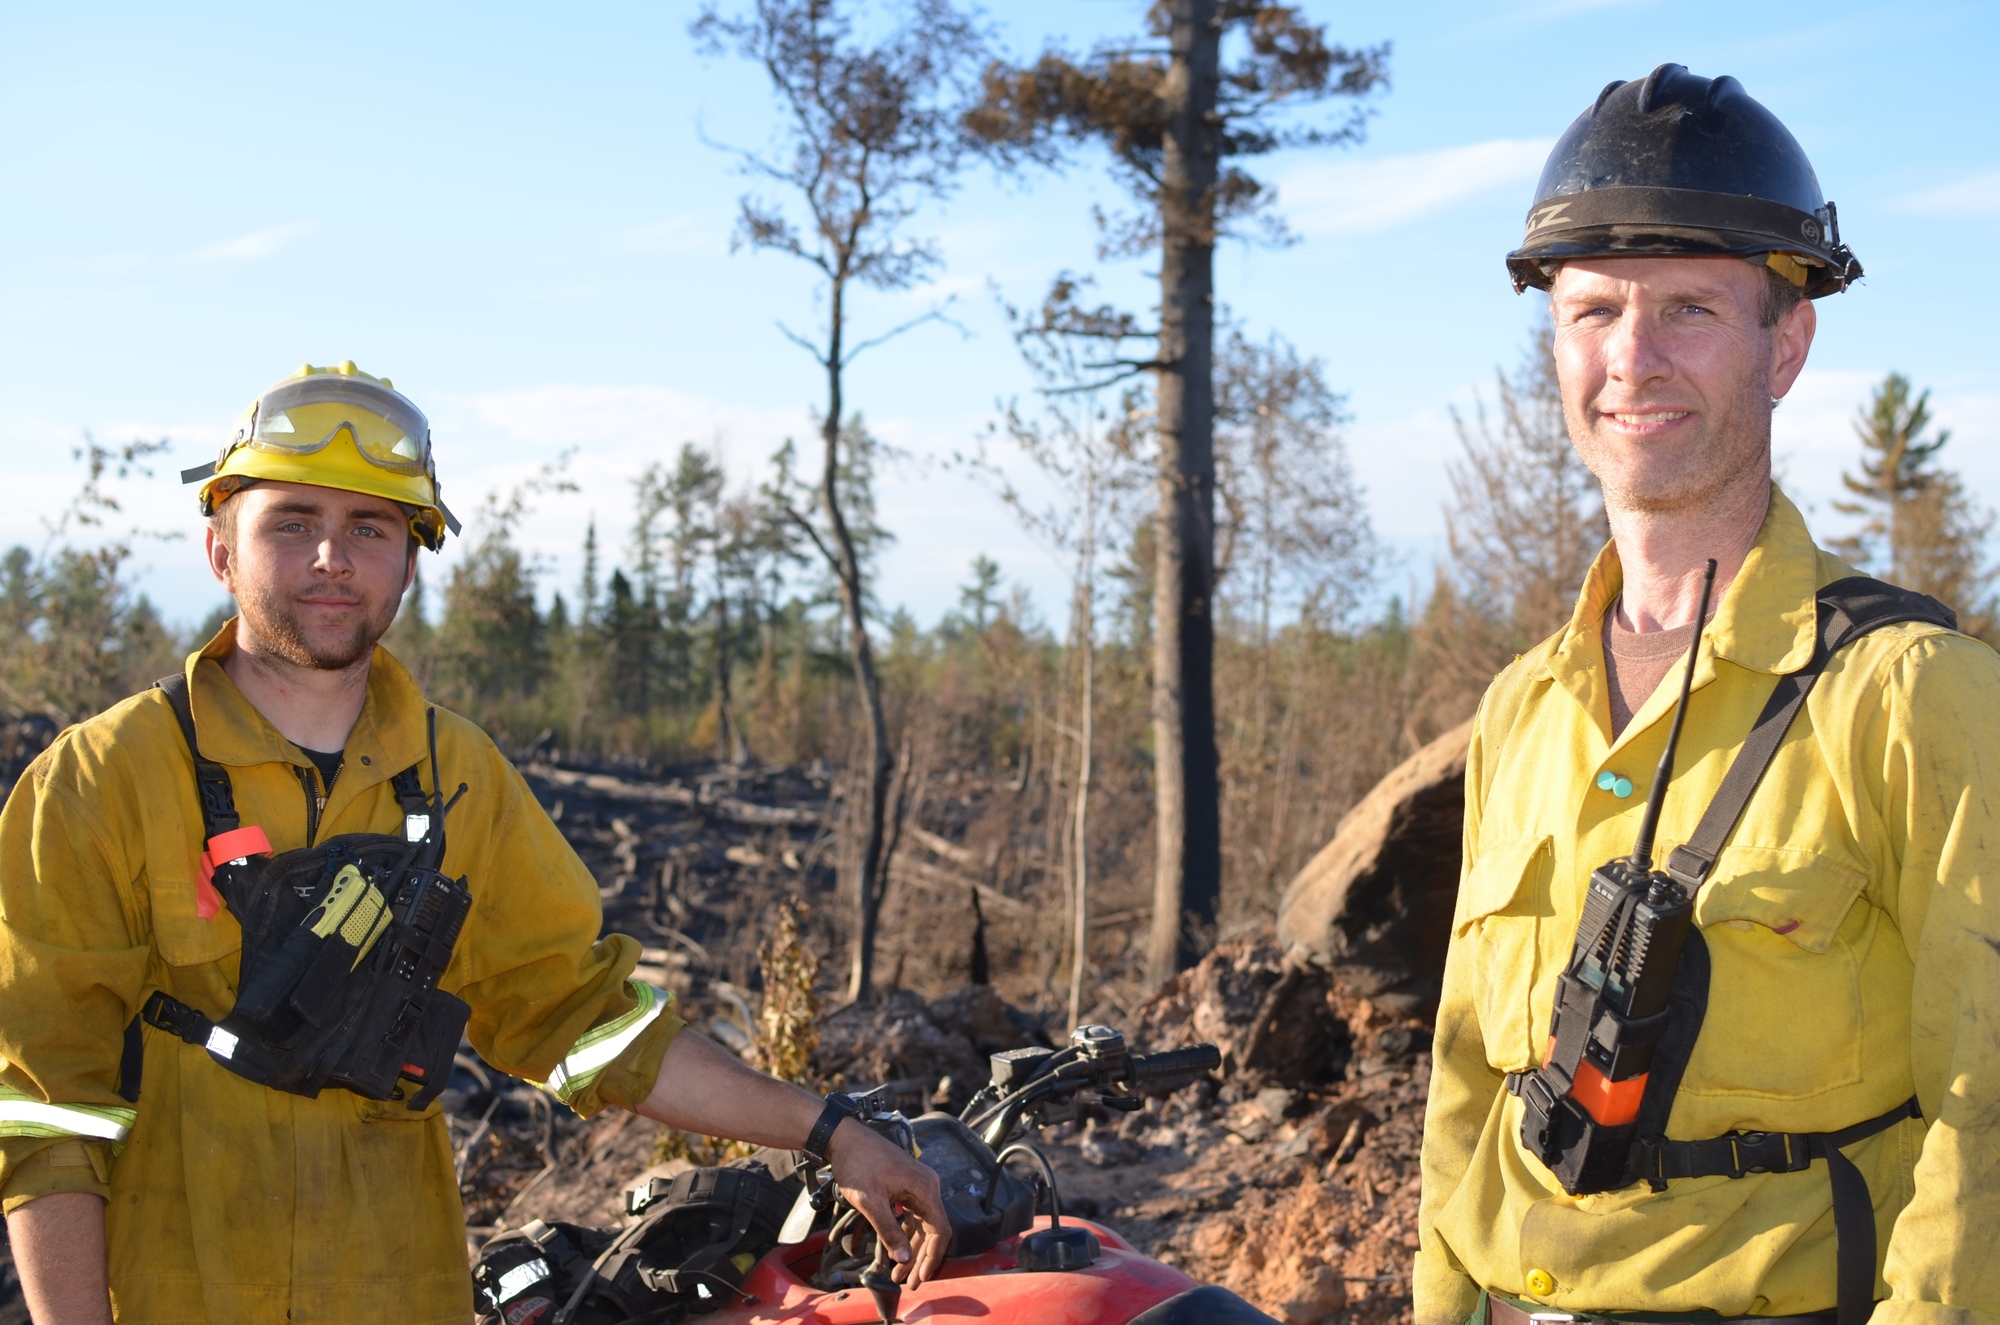 Michigan Department of Natural Resources firefighters Jacob “Jake” Burton, left, and Ed Rice photographed during the County Road 601 Fire in July 2015